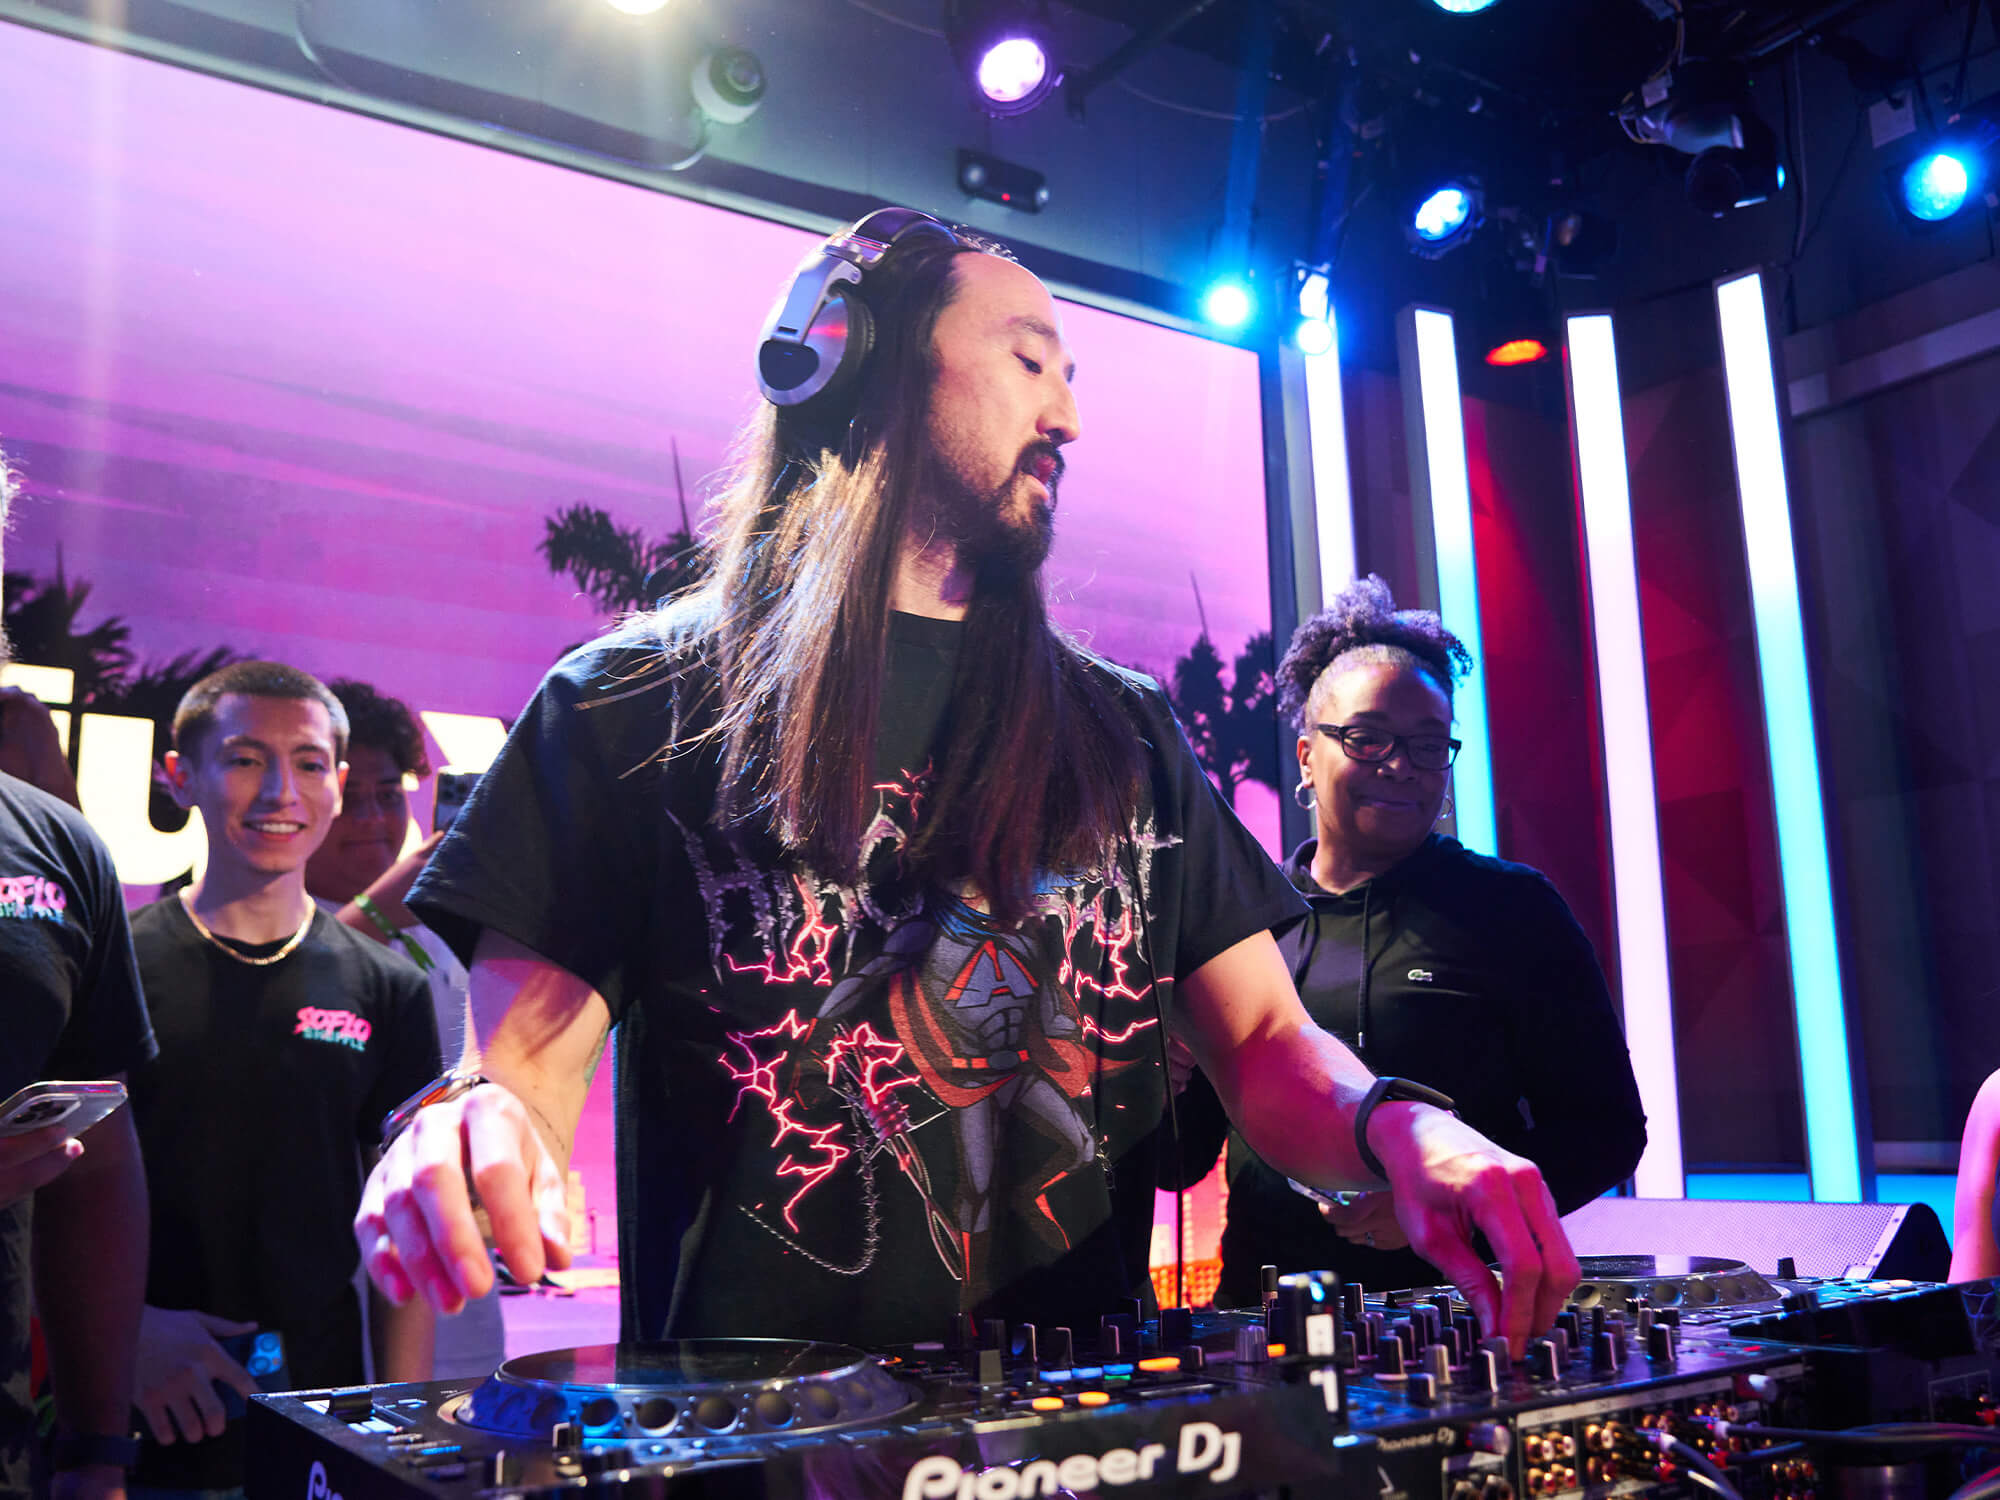 Steve Aoki behind the decks. People stand behind him and the room is lit up with purple lighting. He has long dark hair and a beard, and has headphones on.